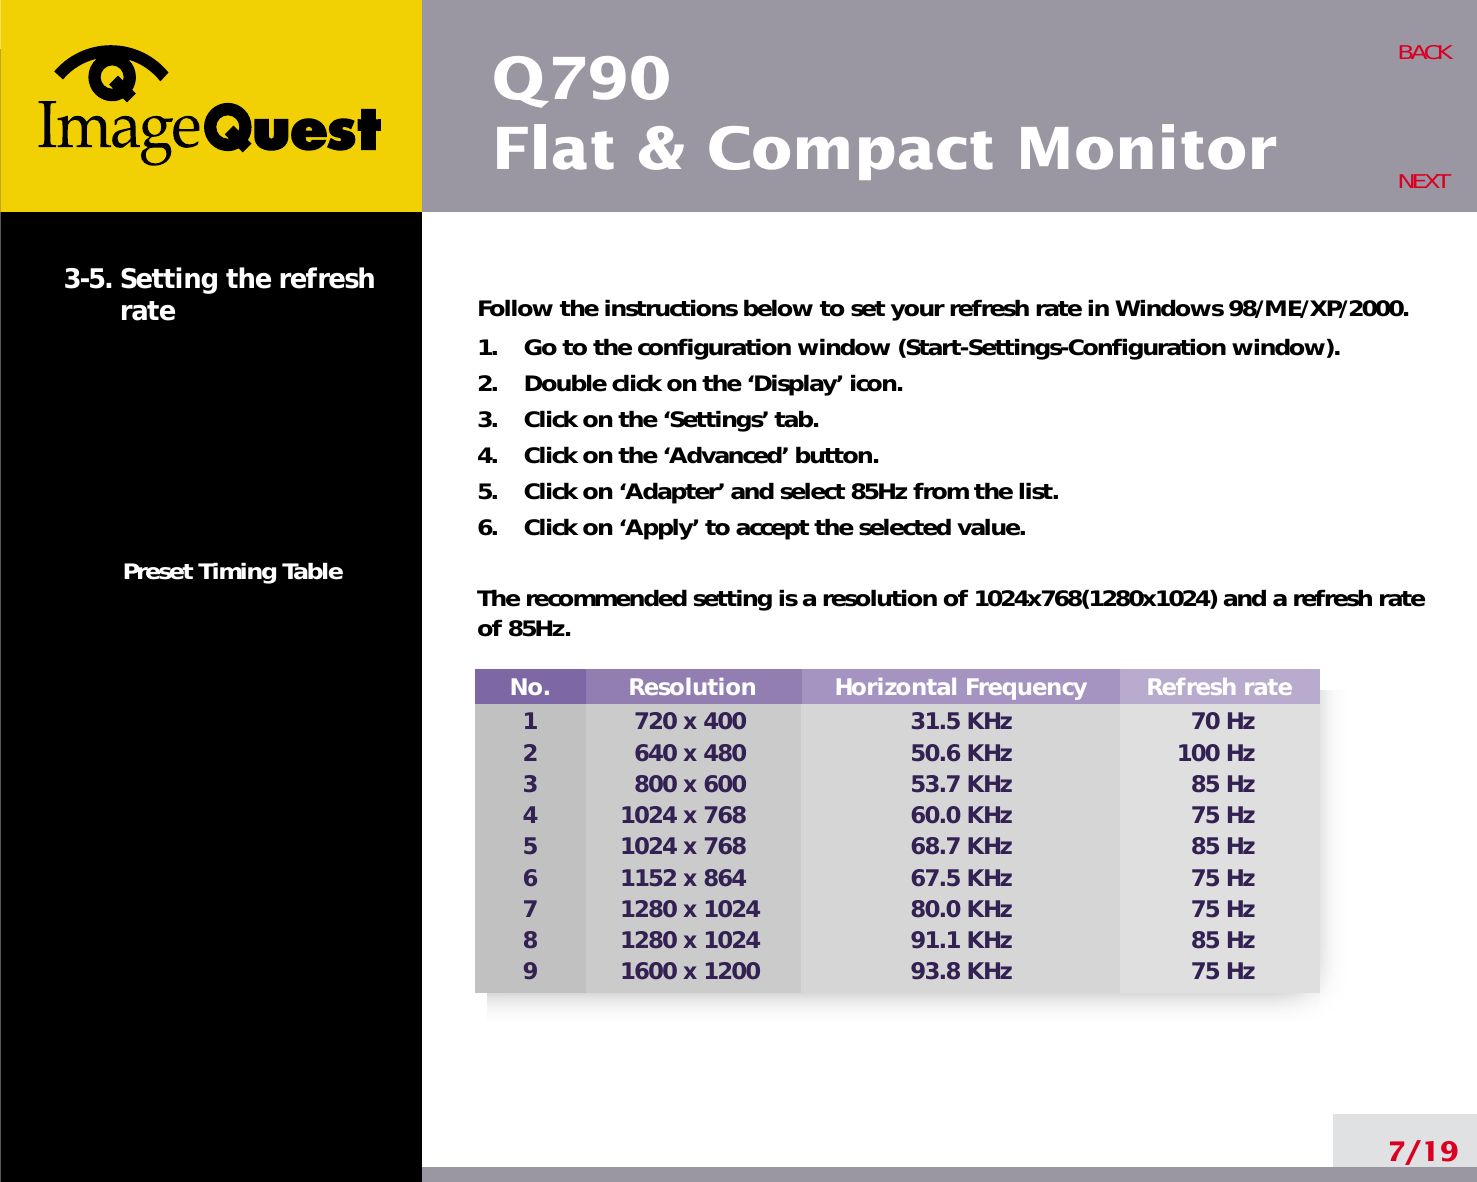 Q790Flat &amp; Compact Monitor7/19BACKNEXT3-5. Setting the refreshratePreset Timing TableFollow the instructions below to set your refresh rate in Windows 98/ME/XP/2000.1.    Go to the configuration window (Start-Settings-Configuration window).2.    Double click on the ‘Display’ icon.3.    Click on the ‘Settings’ tab.4.    Click on the ‘Advanced’ button.5.    Click on ‘Adapter’ and select 85Hz from the list.6.    Click on ‘Apply’ to accept the selected value.The recommended setting is a resolution of 1024x768(1280x1024) and a refresh rateof 85Hz.No.123456789Resolution720 x 400640 x 480800 x 6001024 x 7681024 x 7681152 x 8641280 x 10241280 x 10241600 x 1200Refresh rate70 Hz100 Hz85 Hz75 Hz85 Hz75 Hz75 Hz85 Hz75 HzHorizontal Frequency31.5 KHz50.6 KHz53.7 KHz60.0 KHz68.7 KHz67.5 KHz80.0 KHz91.1 KHz93.8 KHz